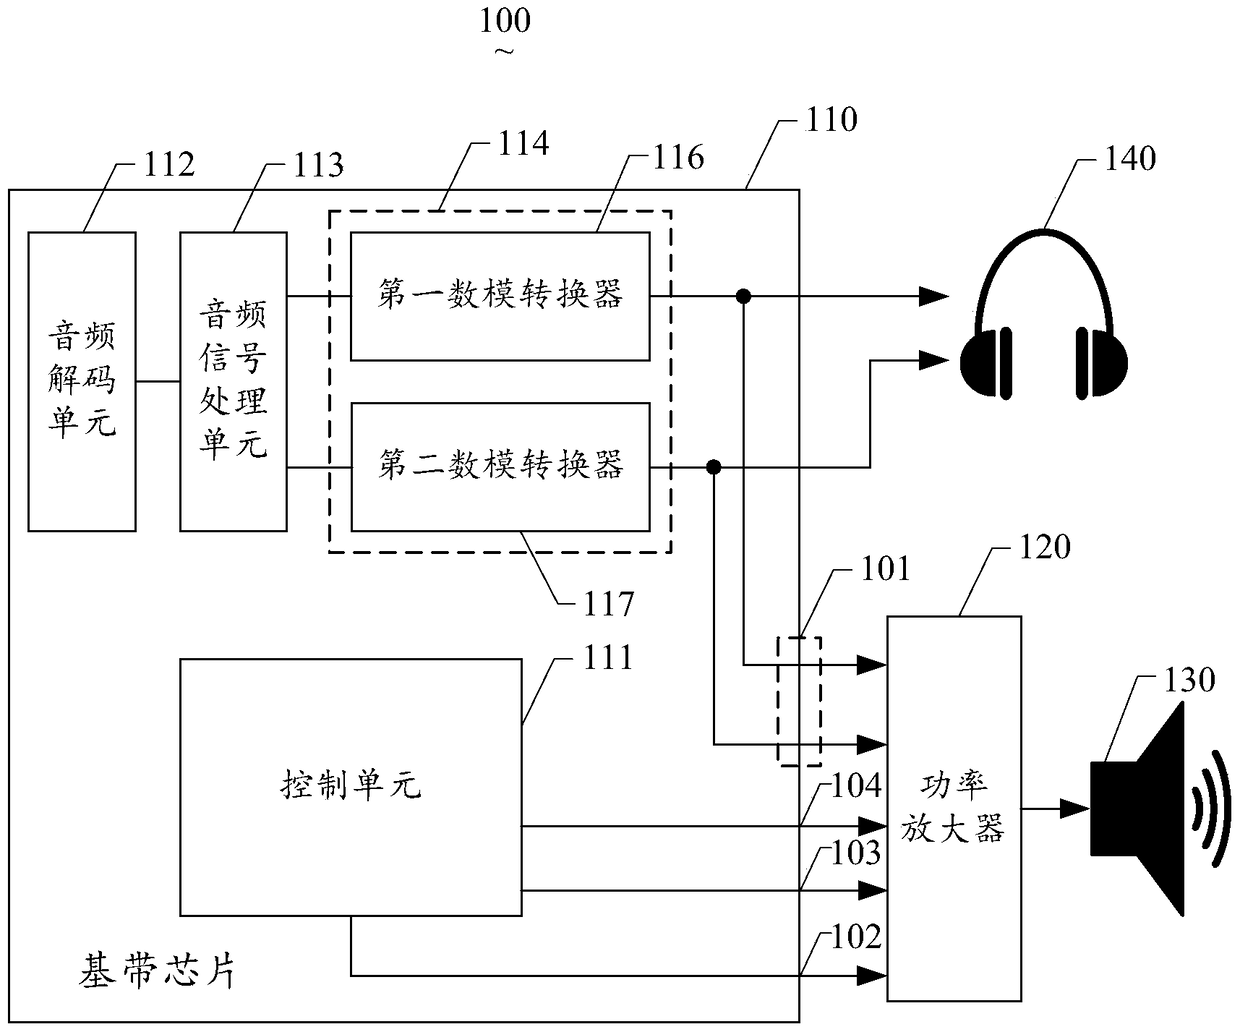 Driving system of multifunctional sounding device and its power amplifier